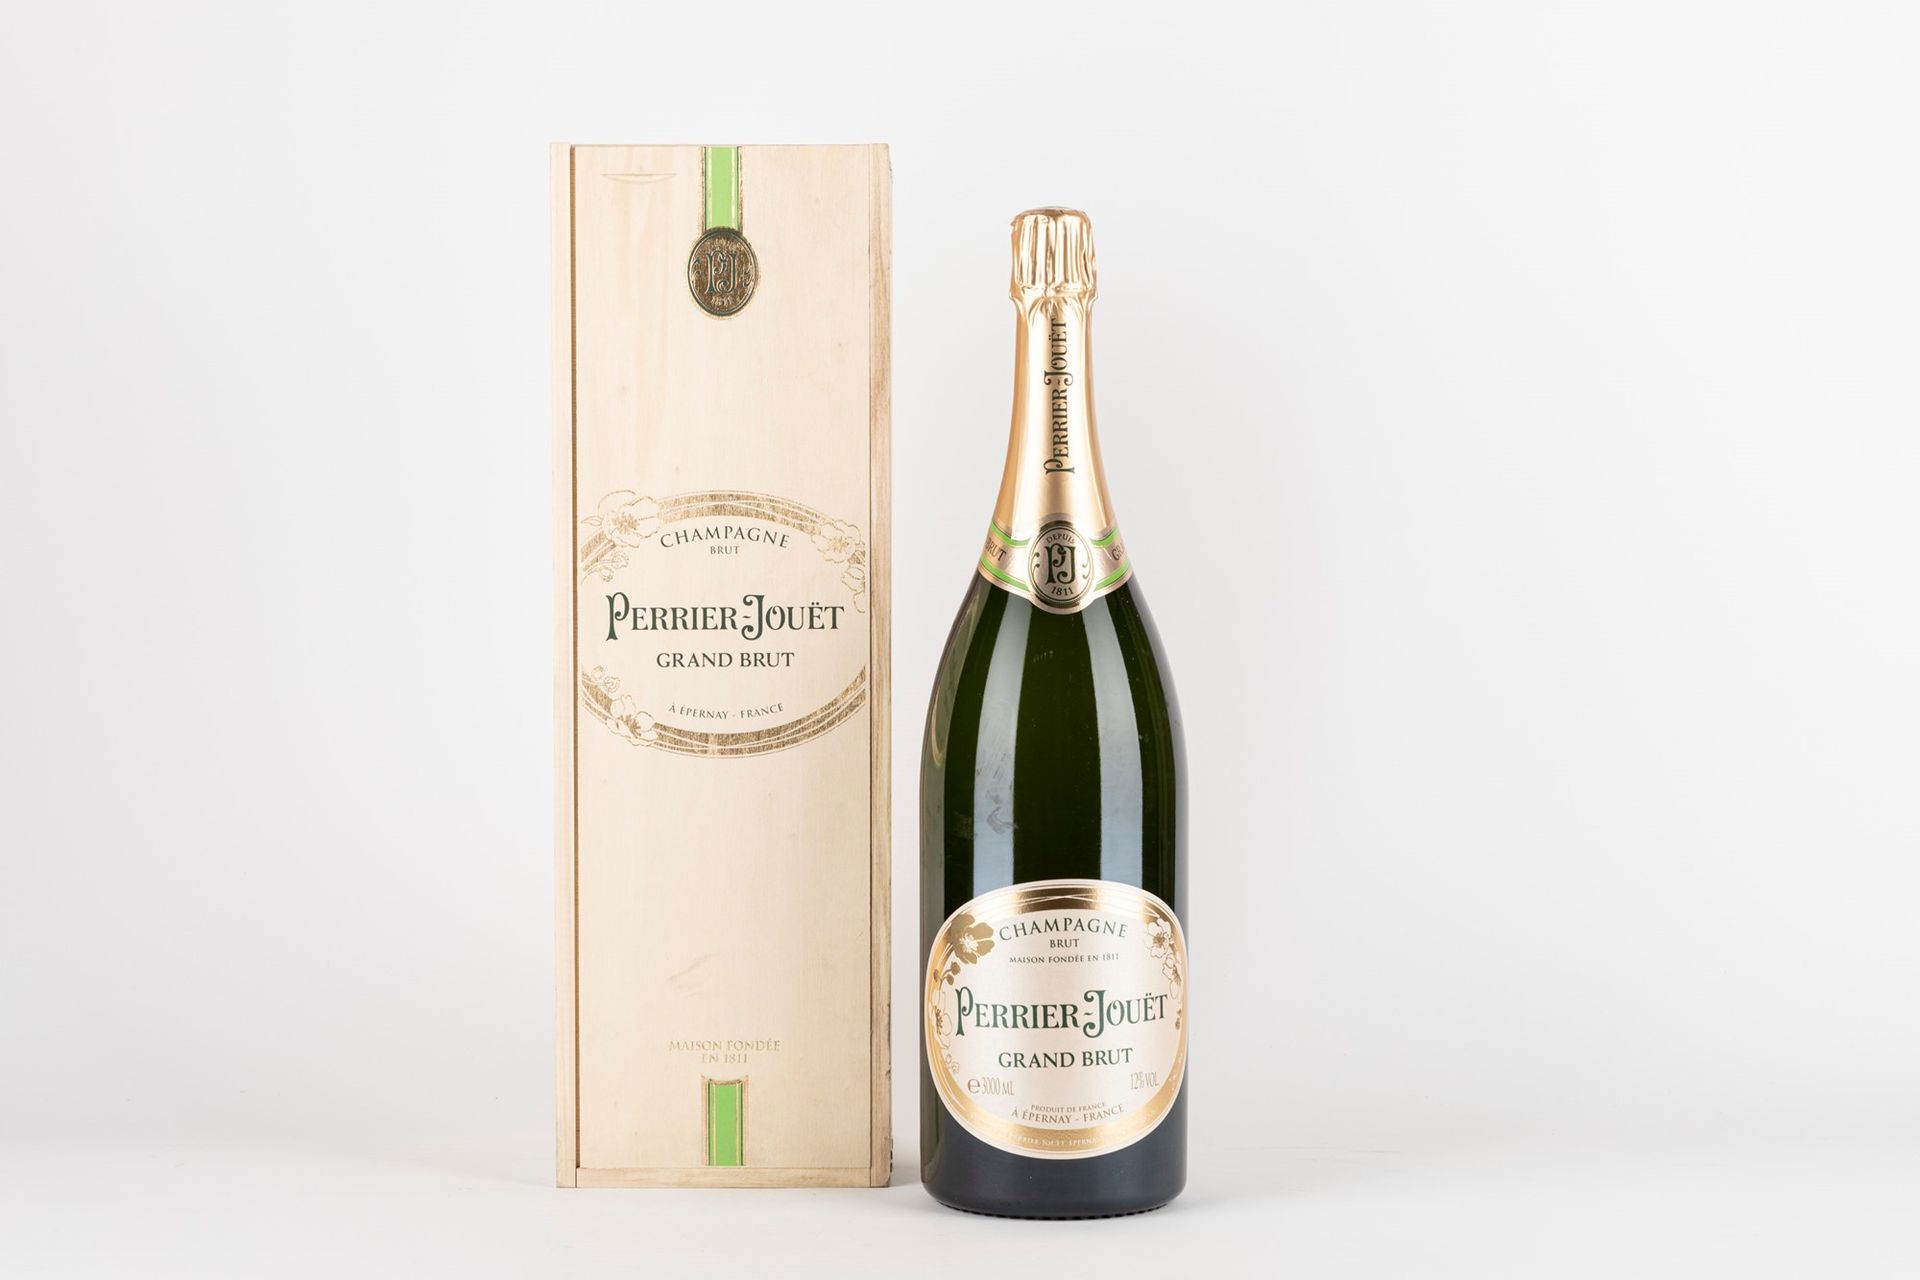 Null France - Champagne / Perrier Jouet Grand Brut 3 Liters 

1 Jeroboam
OWC